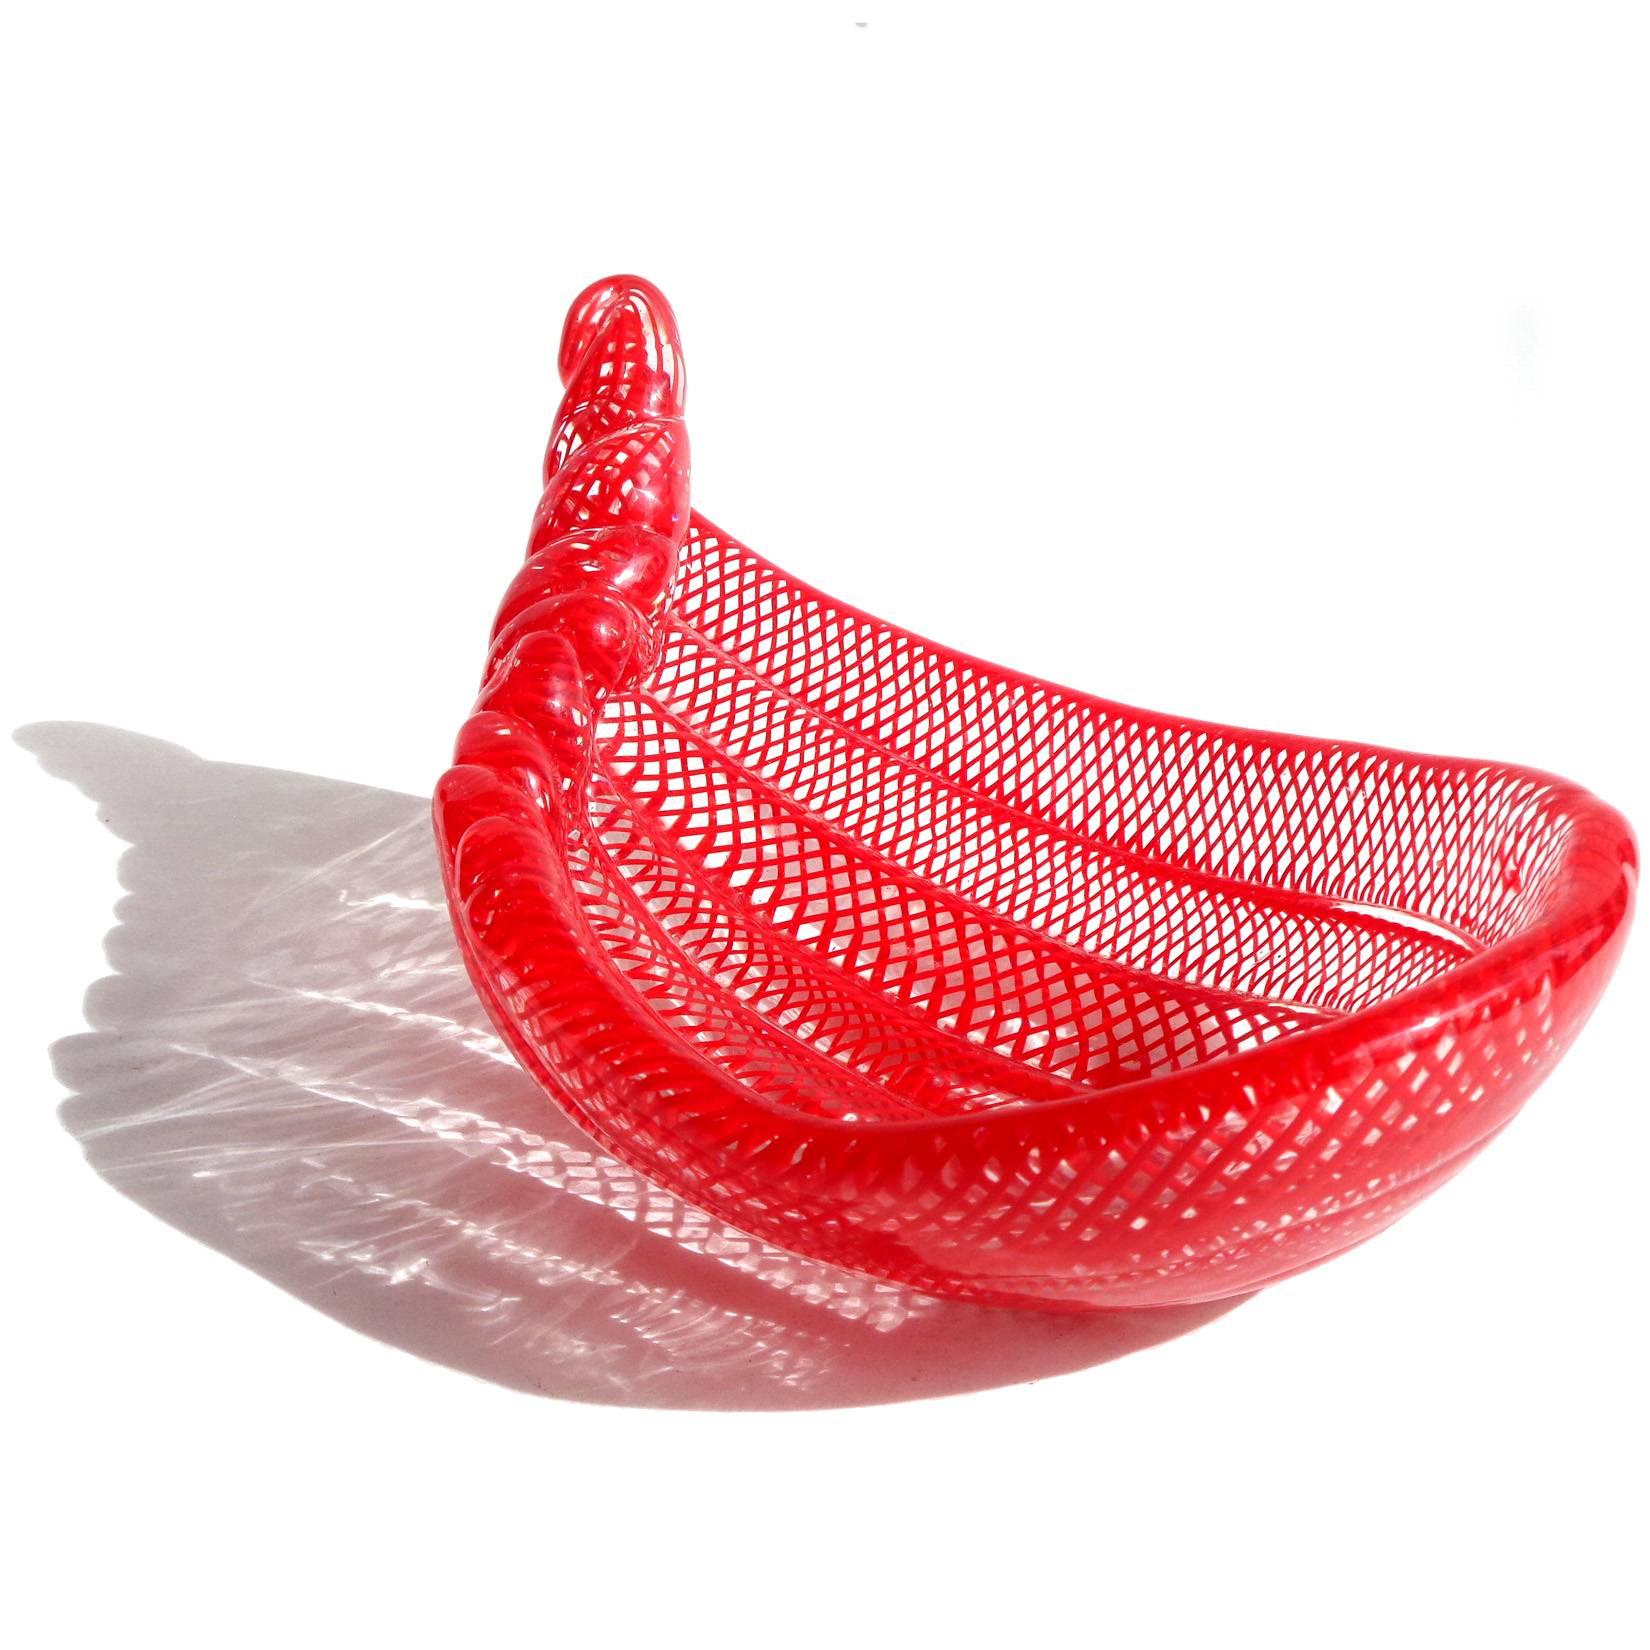 Mid-Century Modern Murano Bright Red Coiled Ribbons Net Design Italian Art Glass Bowl Dish For Sale